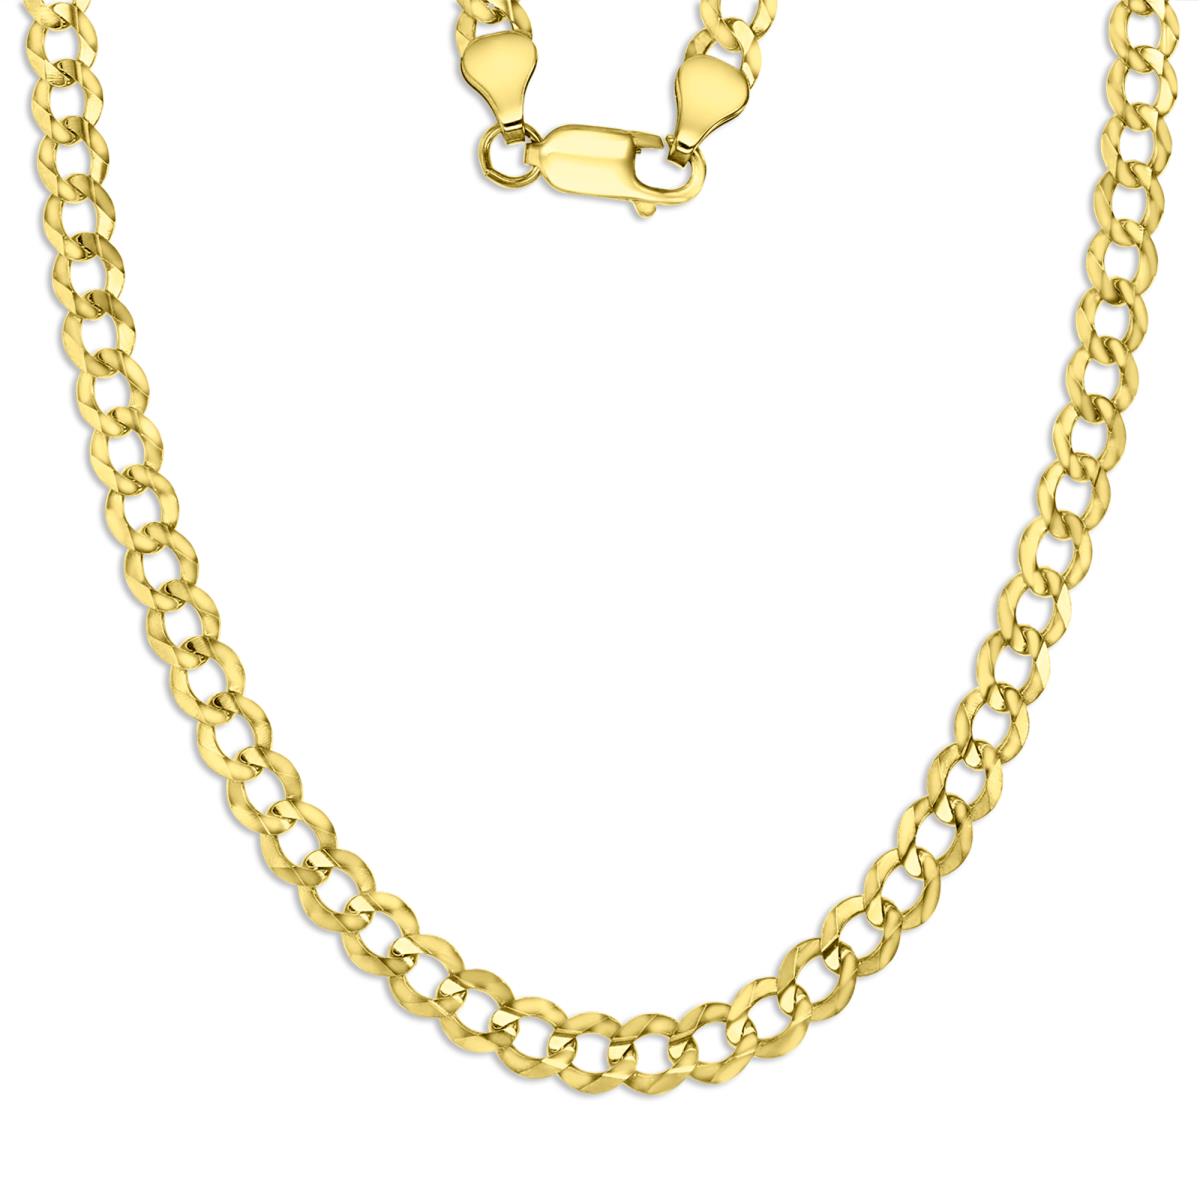 10K Yellow Gold 5.8mm 22" 150 Solid Cuban Chain